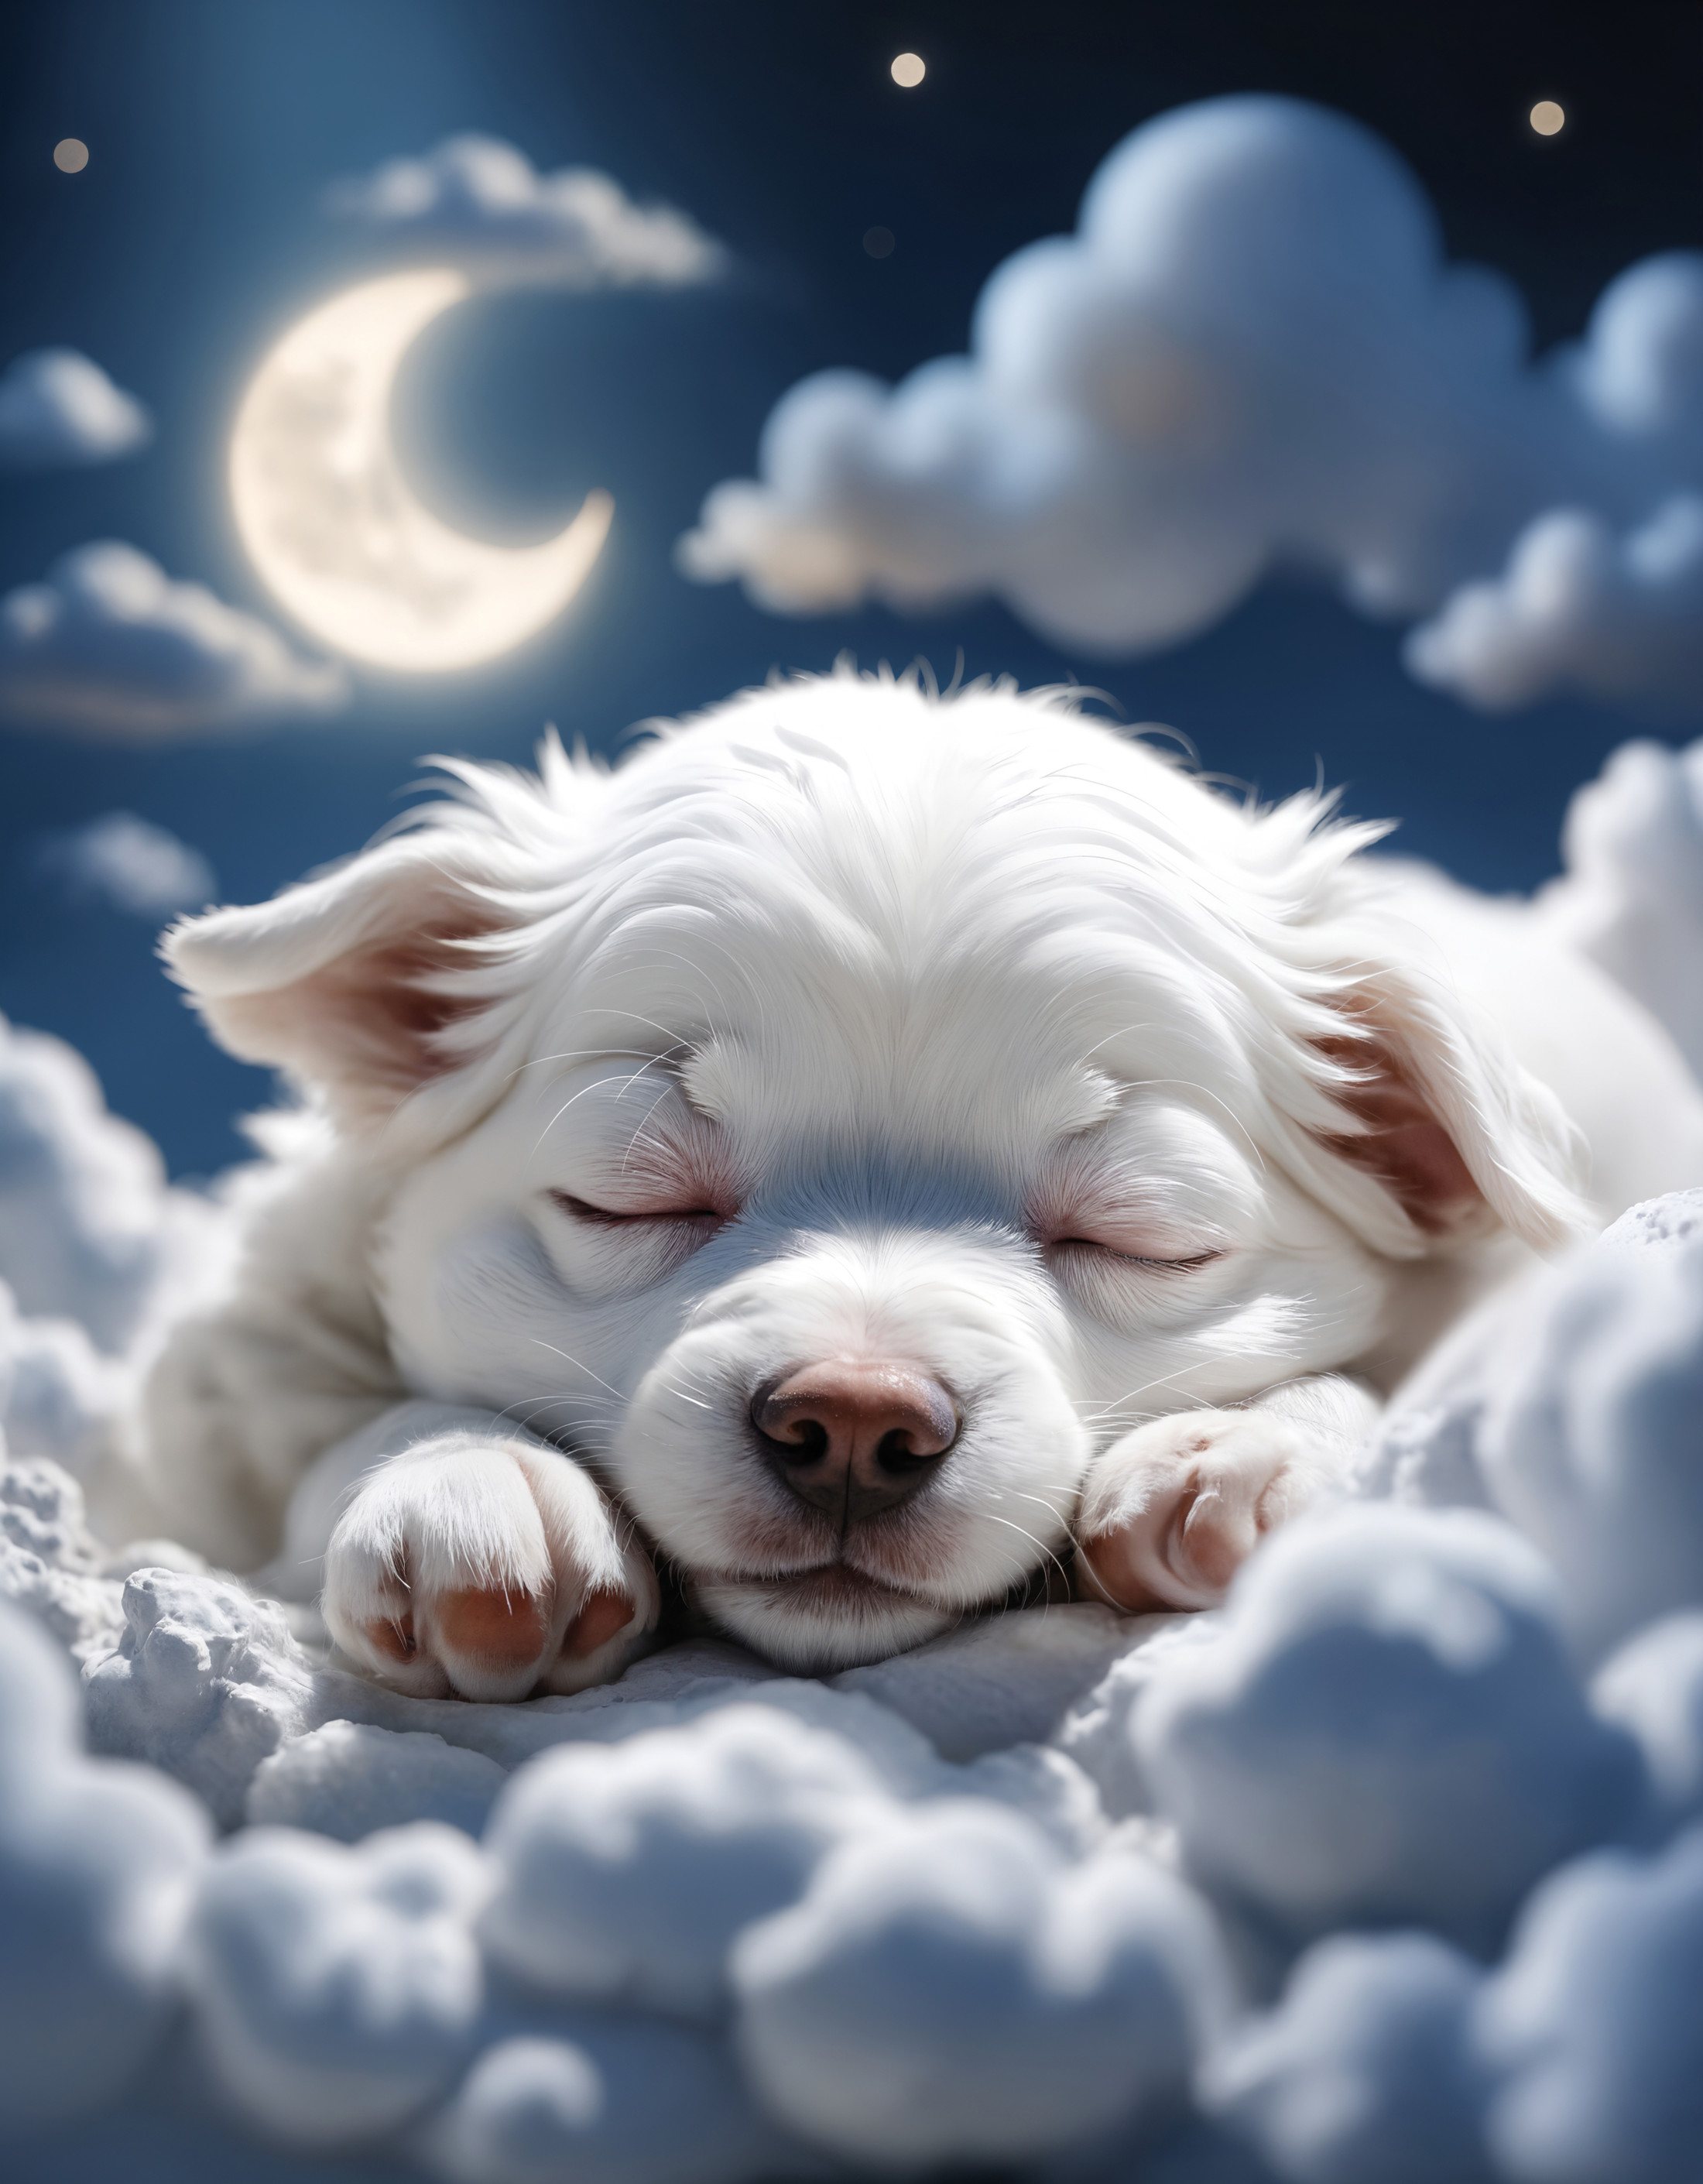 A white pup is sleeping on the clouds. There's a moon in the night sky and no stars Removed From Image ugly, deformed, noi...